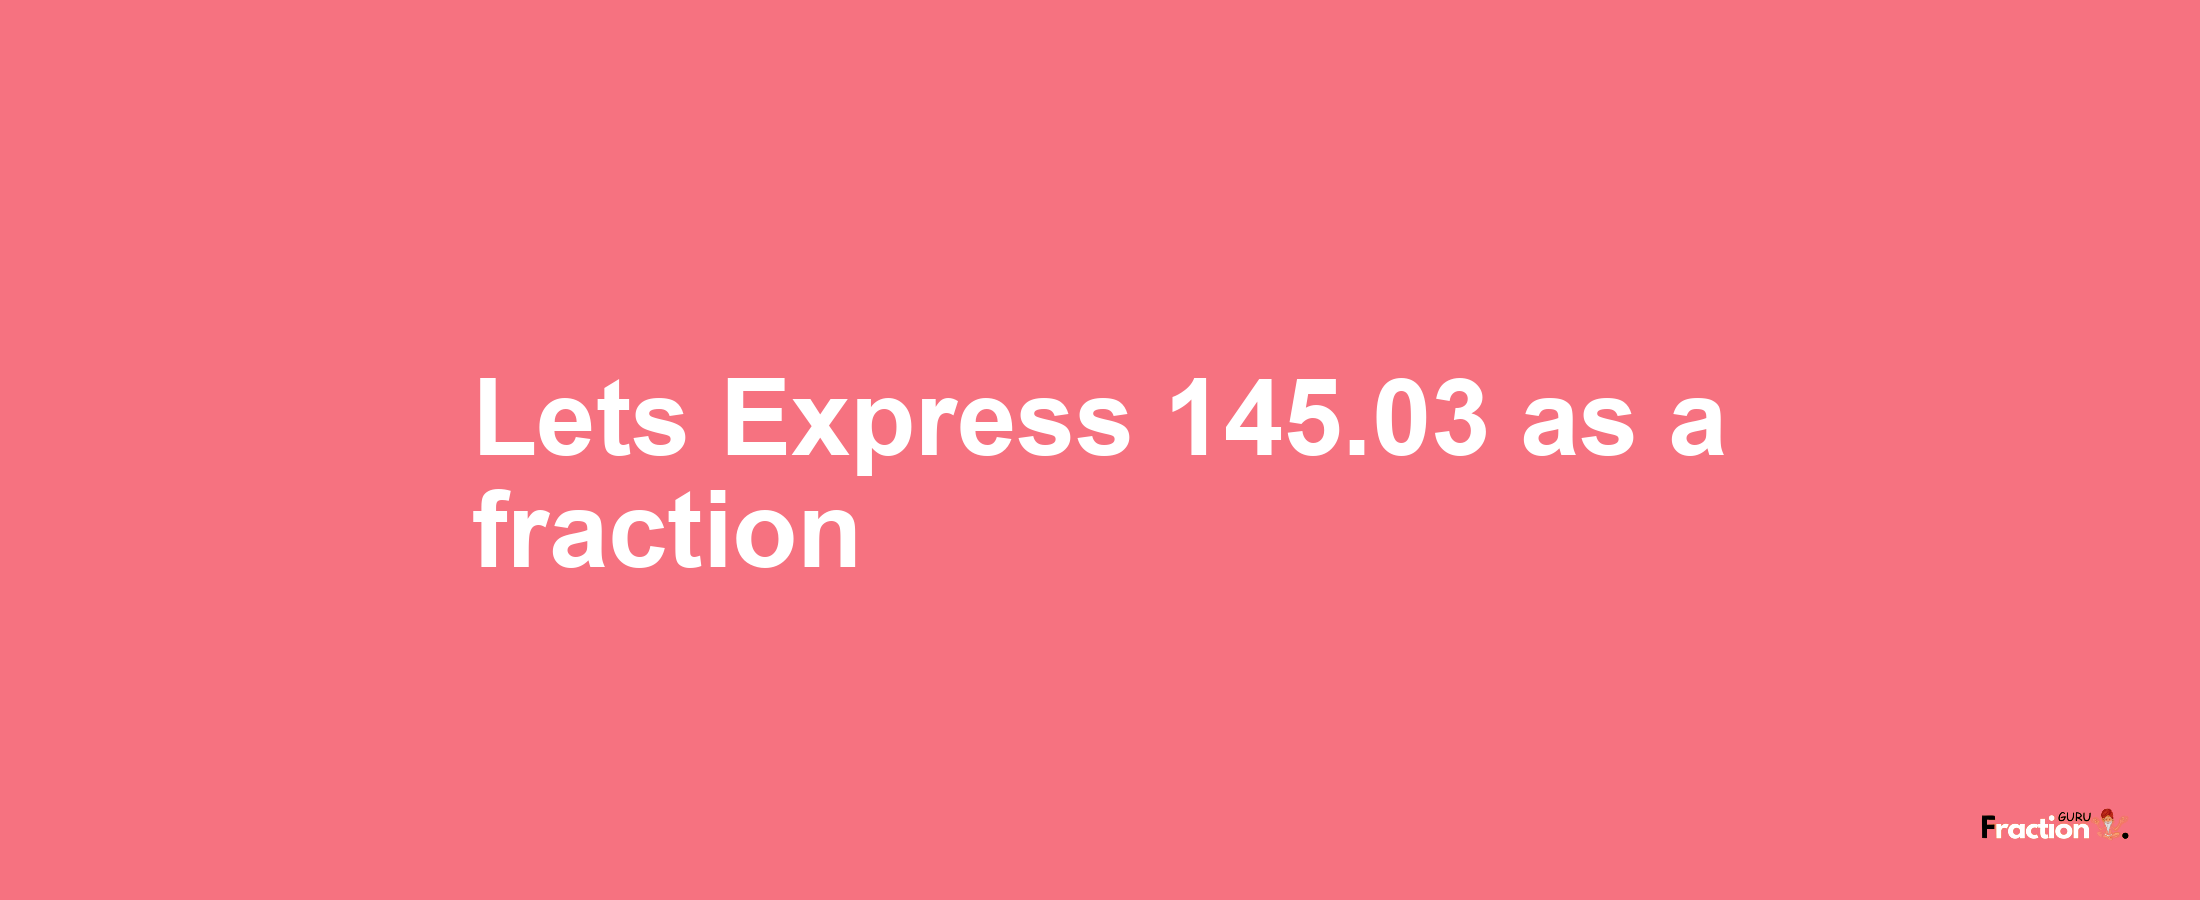 Lets Express 145.03 as afraction